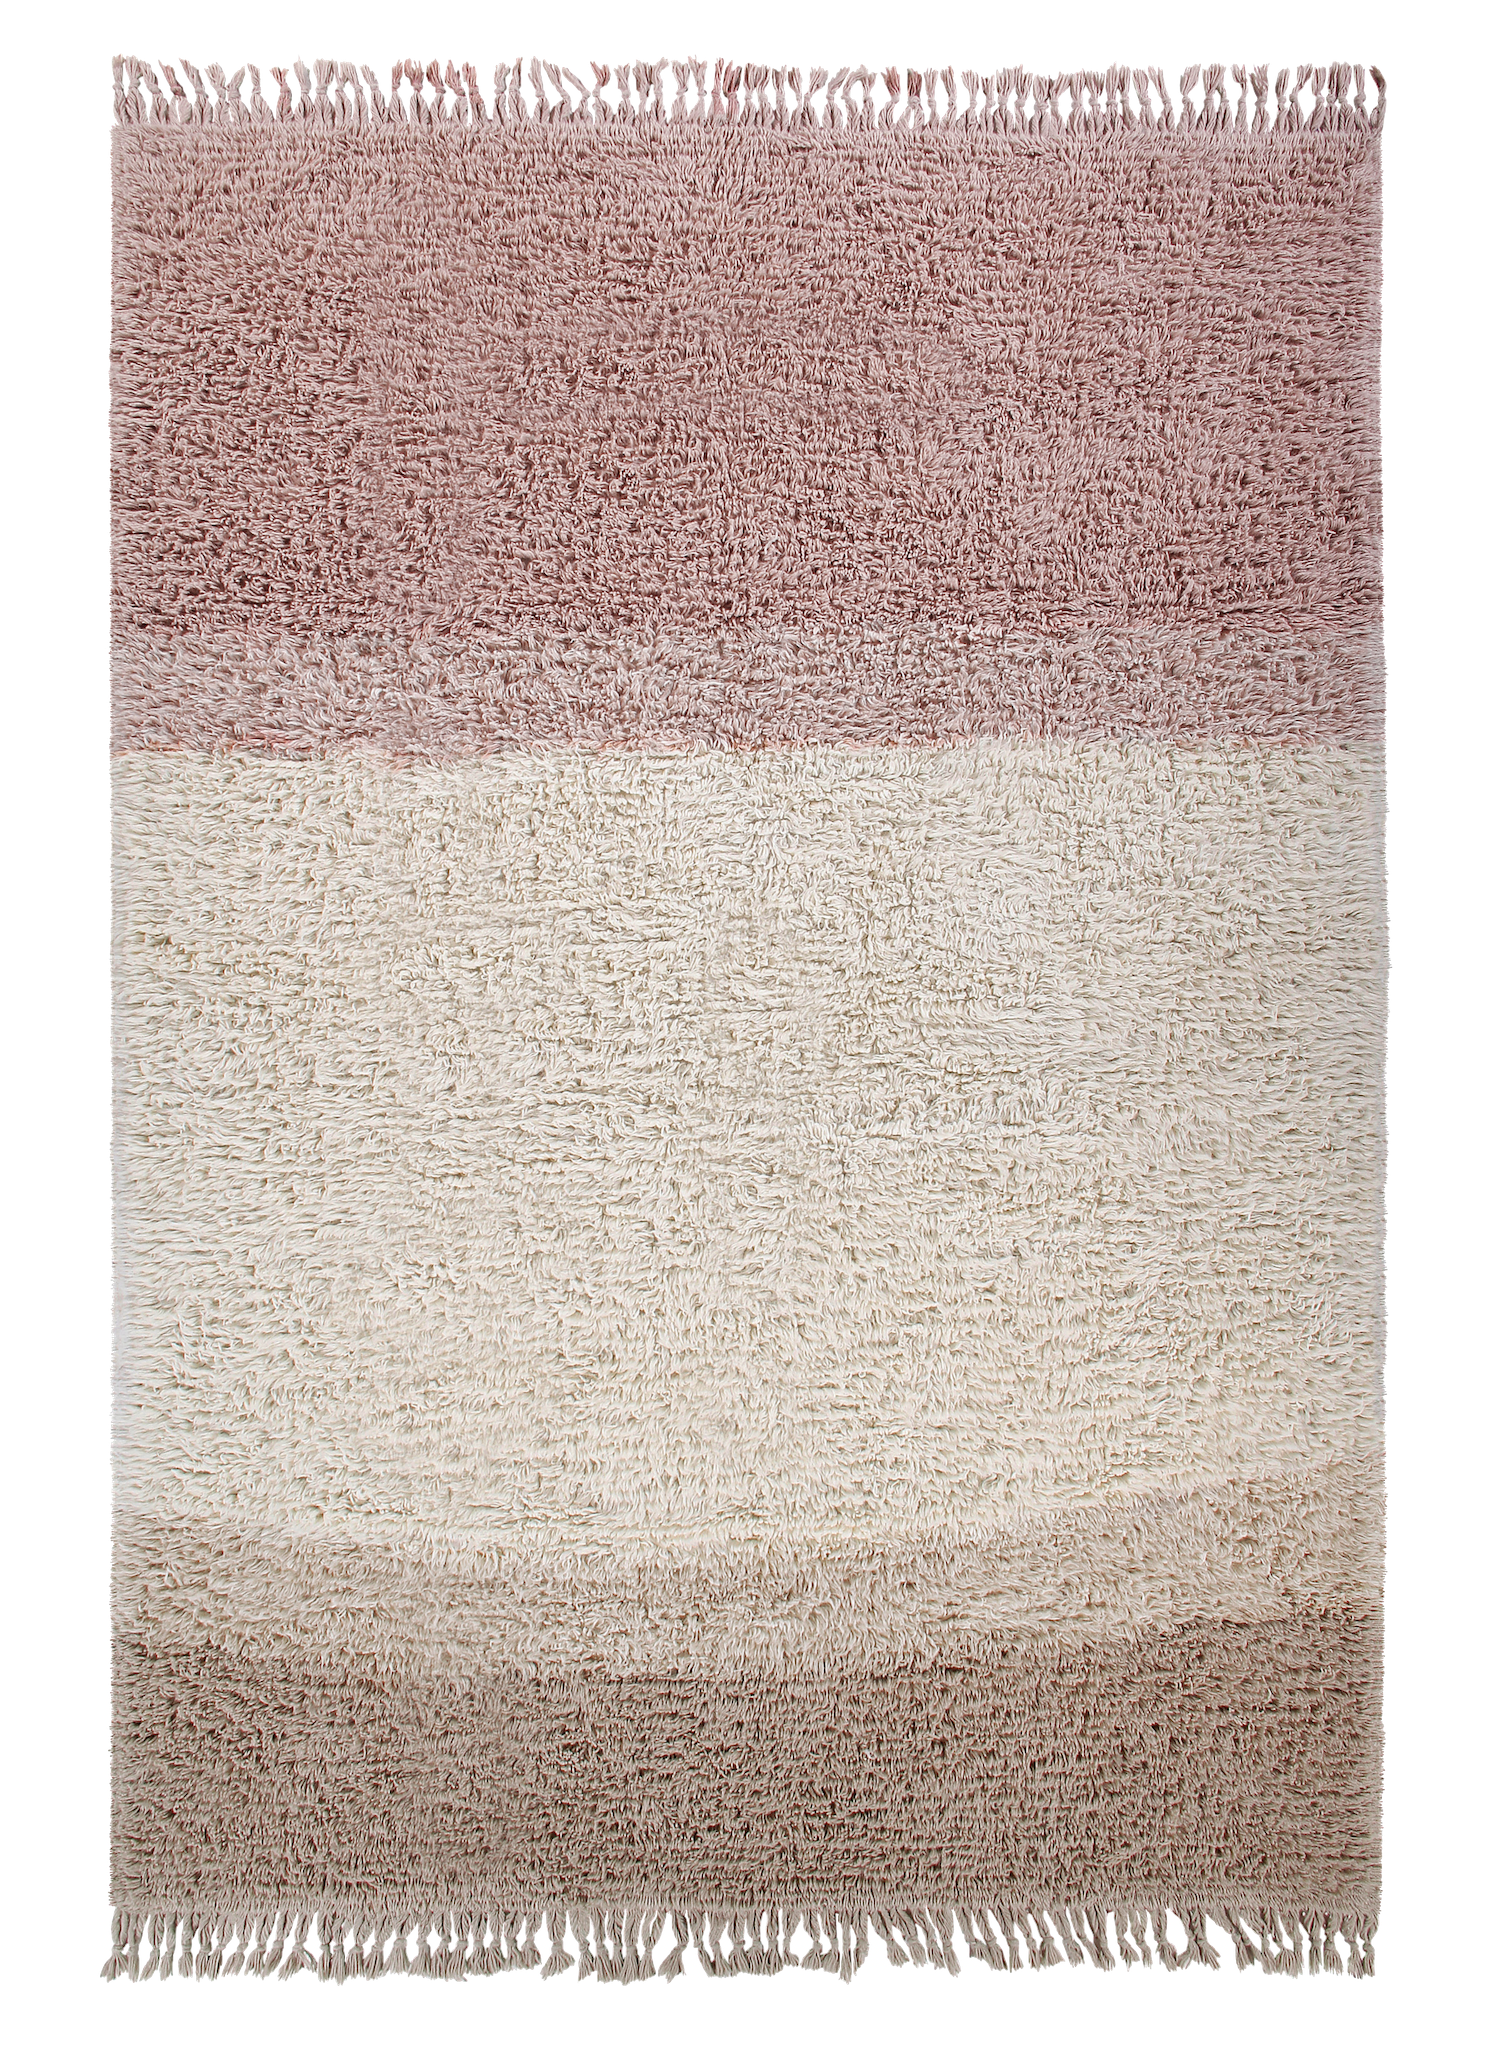 Woolable Rug Sounds of Summer. A soft, washable area rug with dusty rose ombre effect and fray tassel edges, suggesting a hint of the warm summer light. 